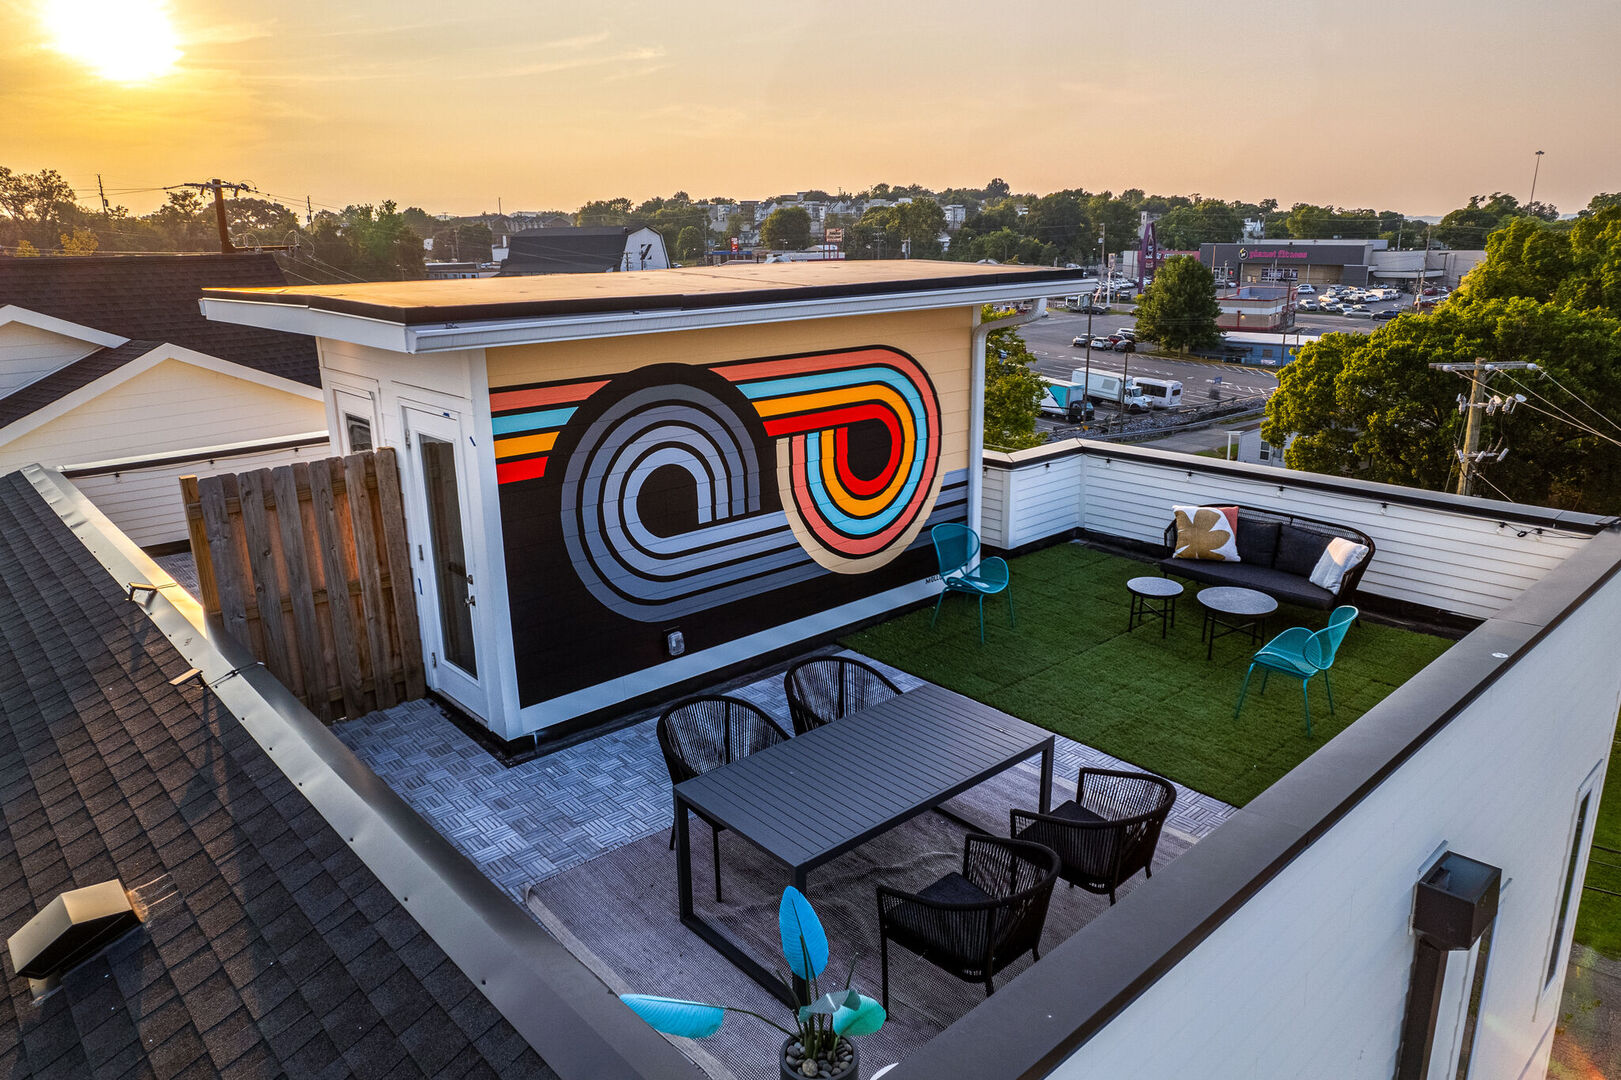 1st Unit, 4th Floor: Private rooftop deck outdoor dining table (seats 4) and lounge area. Entire space is lined with bistro lights and includes a photo op mural!